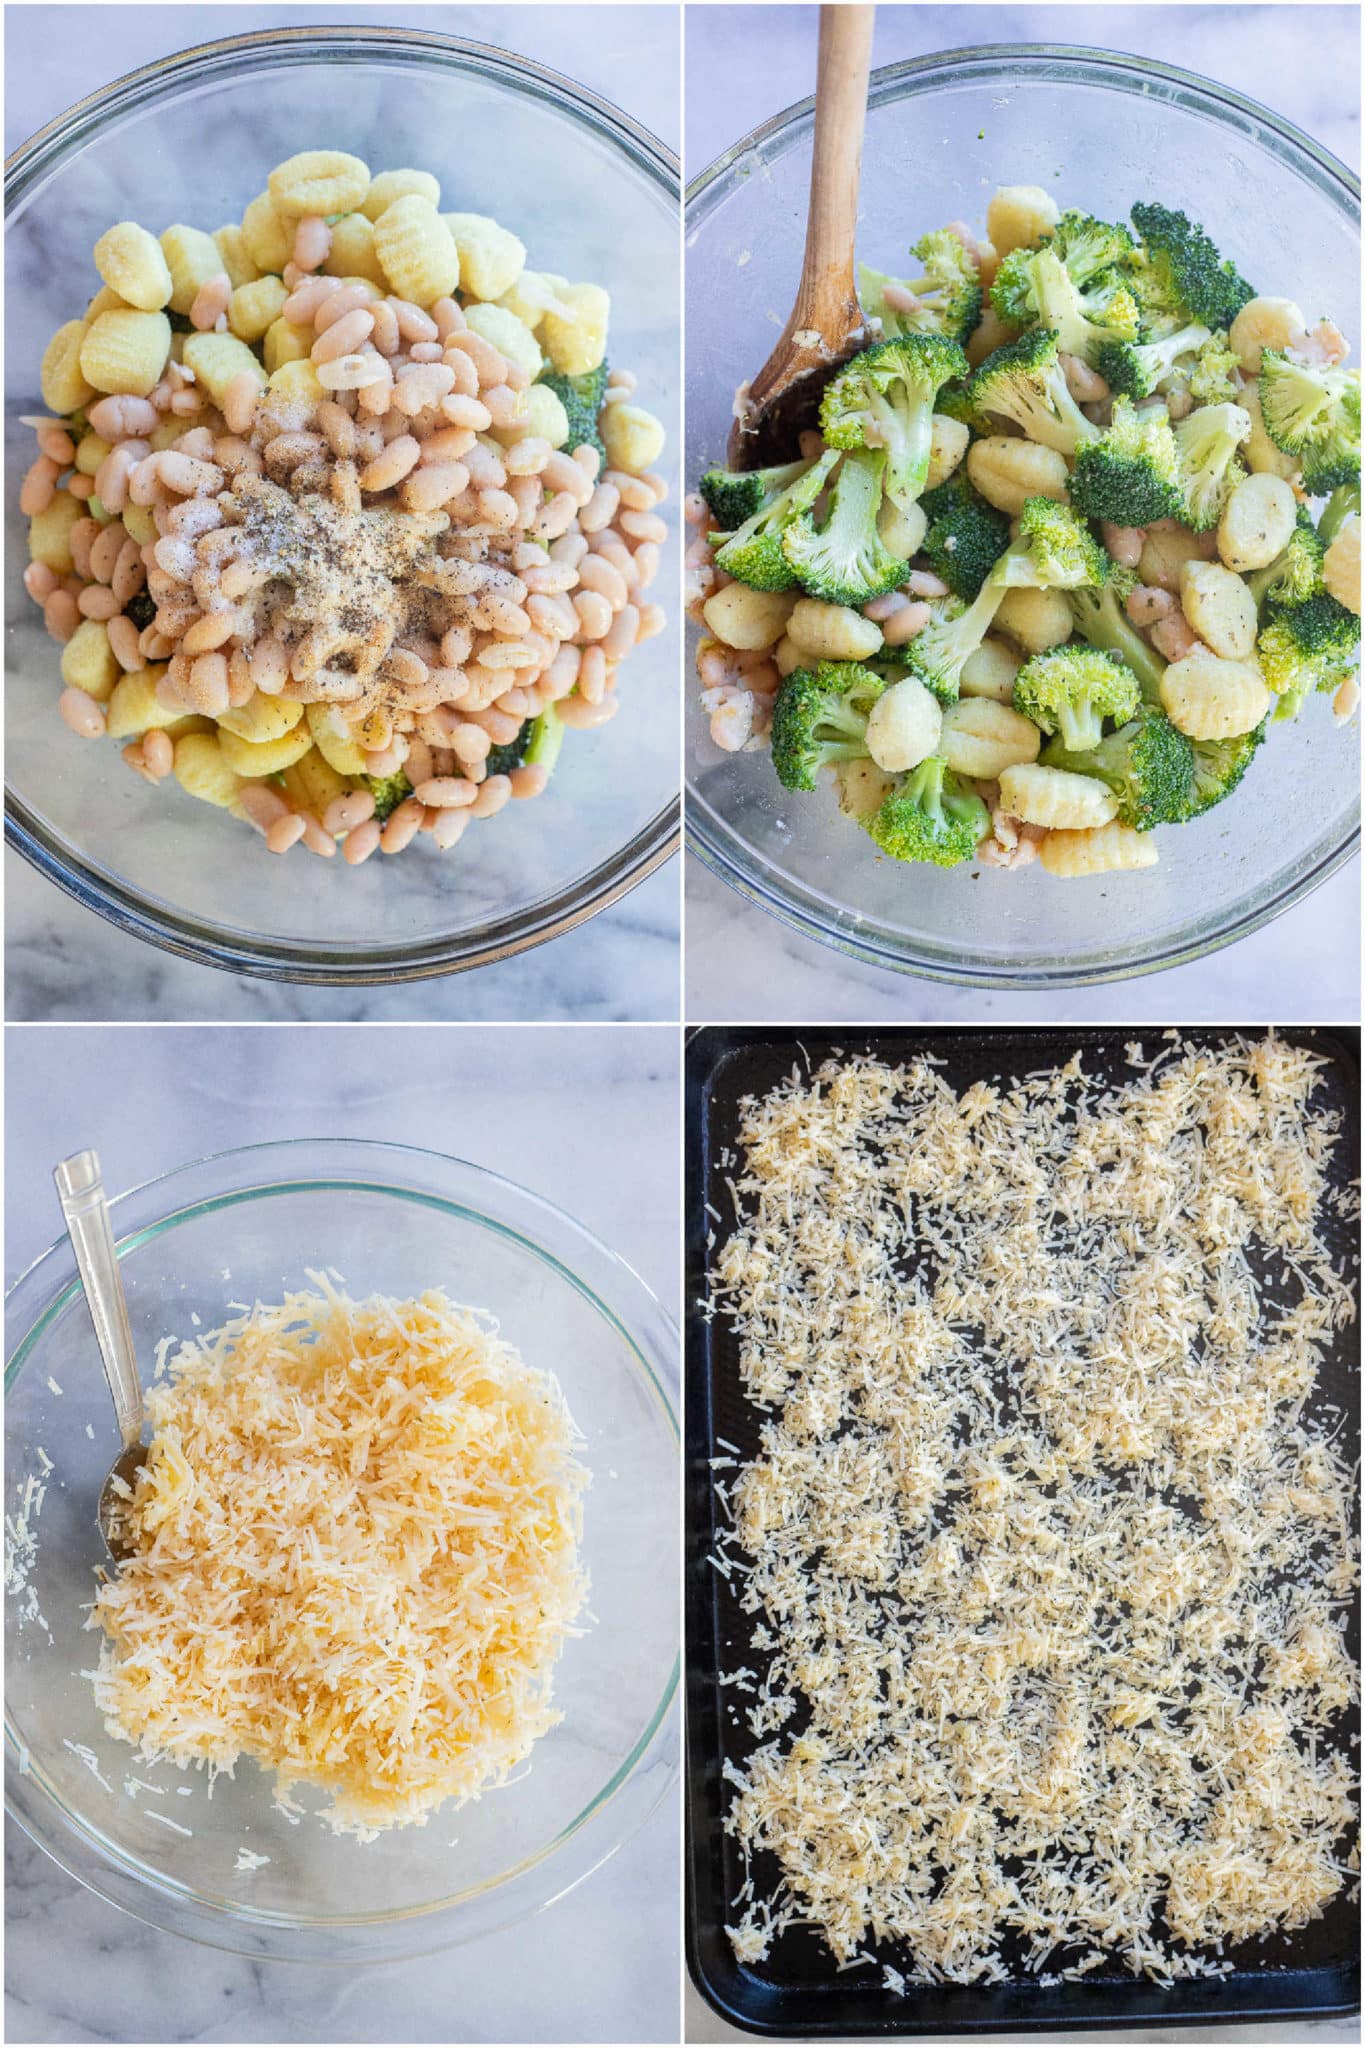 showing how to make a parmesan crusted gnocchi and broccoli bake